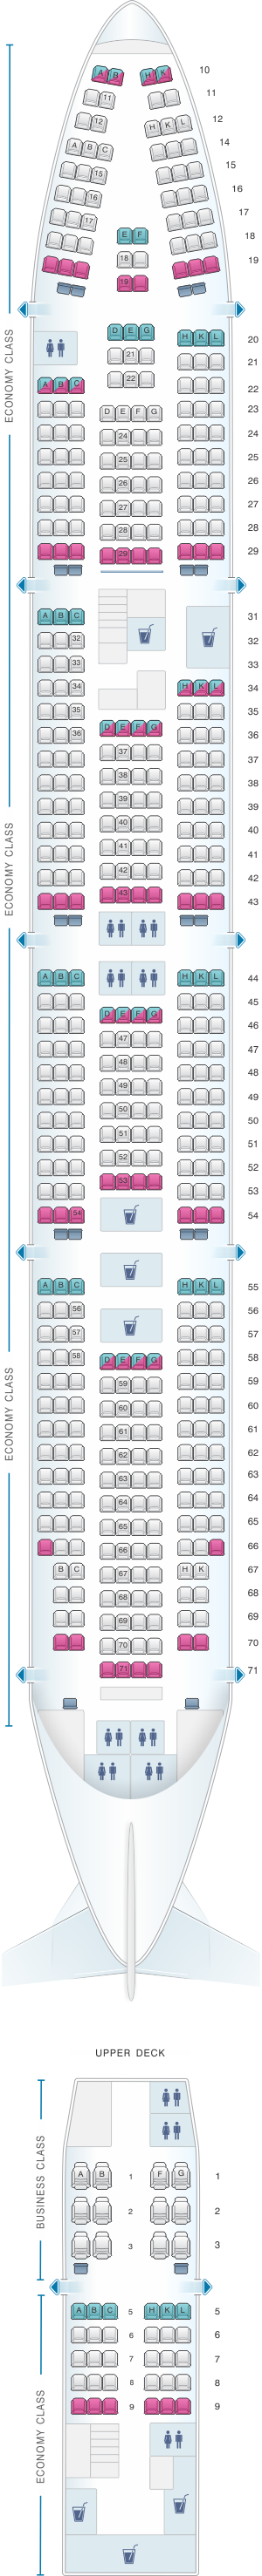 Seat map for Transaero Airlines Boeing B747 400 Config. 2